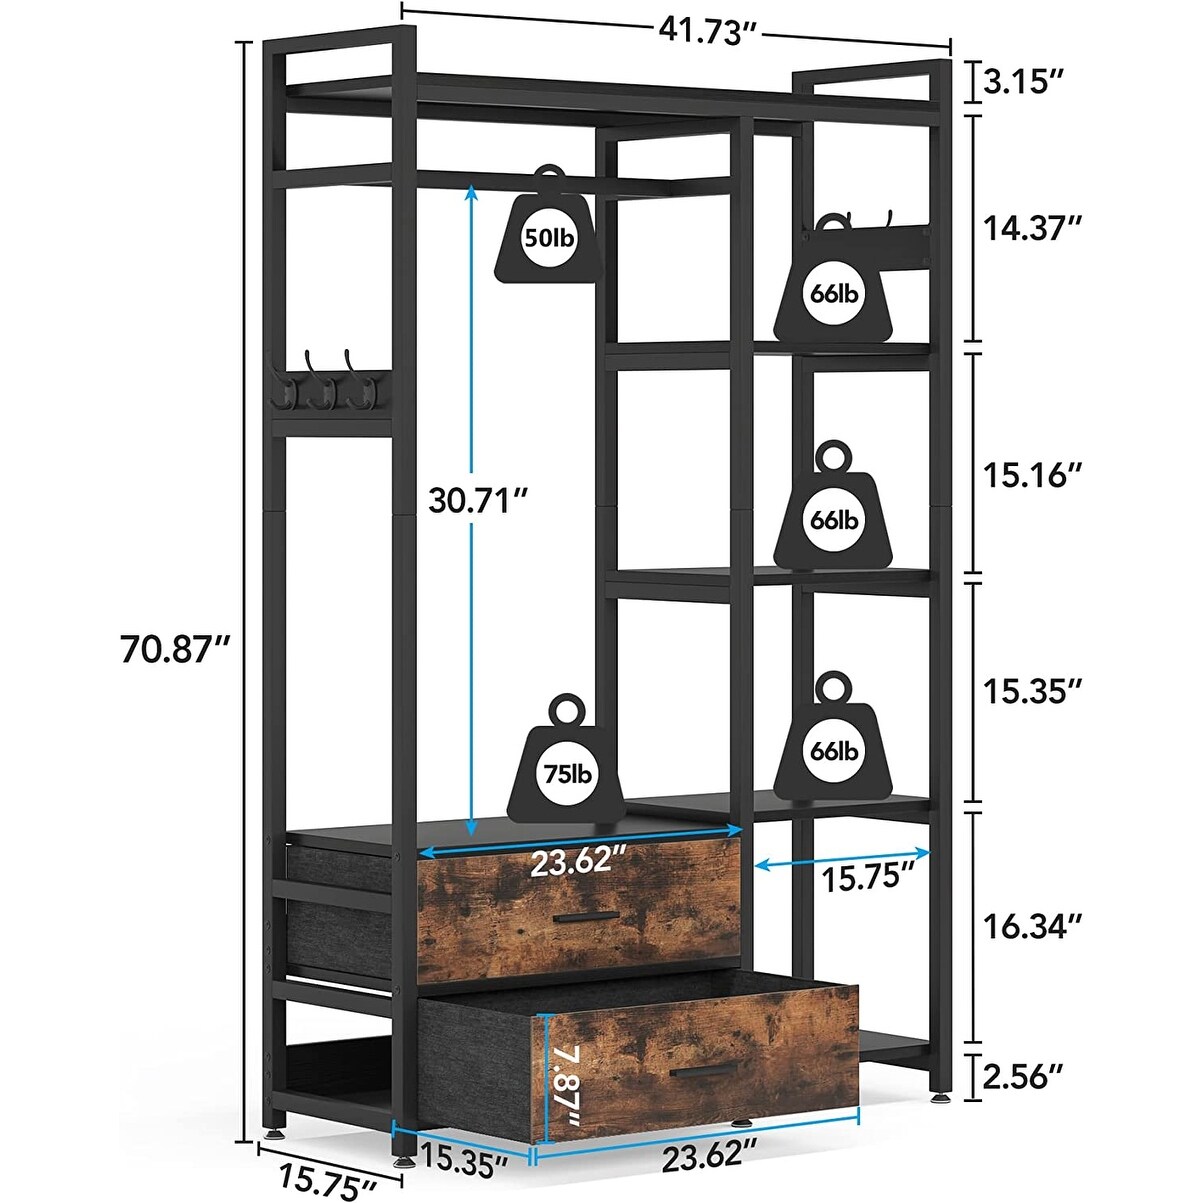 https://ak1.ostkcdn.com/images/products/is/images/direct/e356e08cc0c64d3190bb28671bc5df8e07227be8/Freestanding-Closet-Organizer%2C-Clothes-Rack-with-Drawers%2C-Garment-Rack-Hanging-Clothing-Wardrobe-Storage-Closet-for-Bedroom.jpg